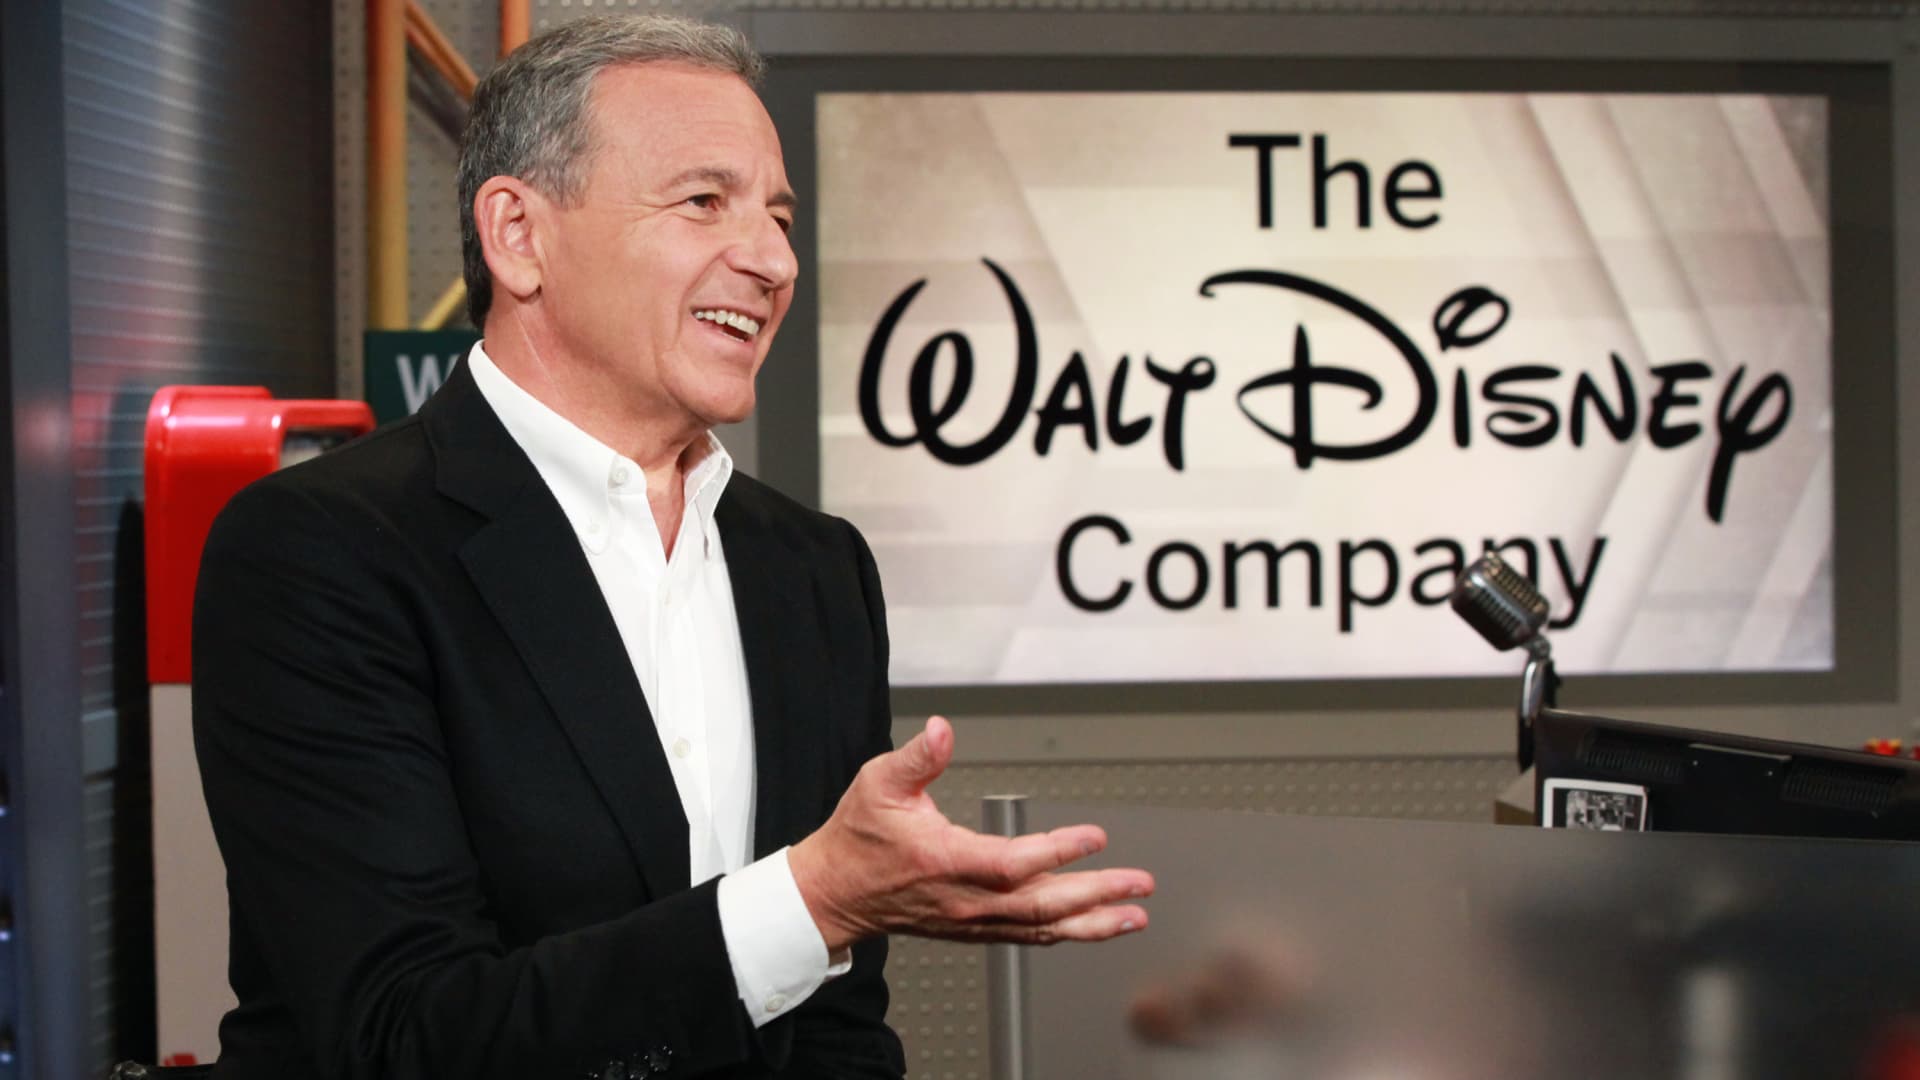 Bob Iger is back. He's the steady hand that Disney needs as CEO to get it back on track - CNBC (Picture 1)